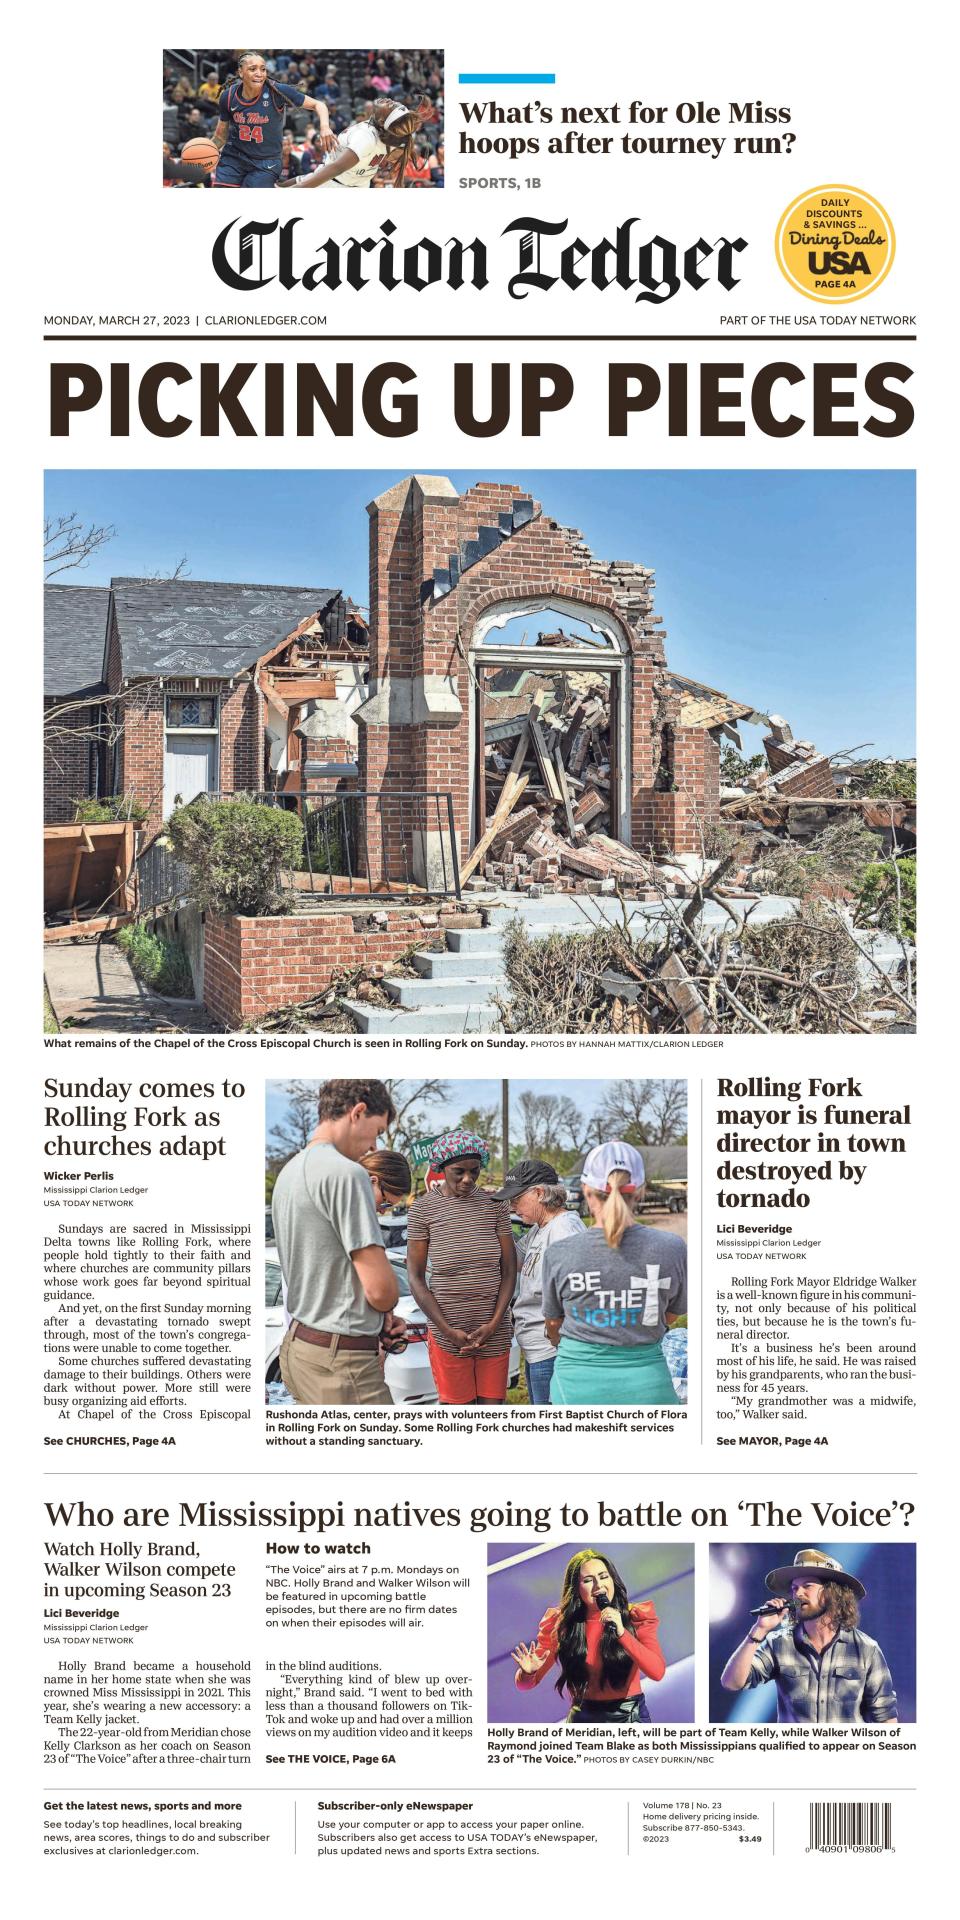 Clarion Ledger Day 3 front page of tornado aftermath.